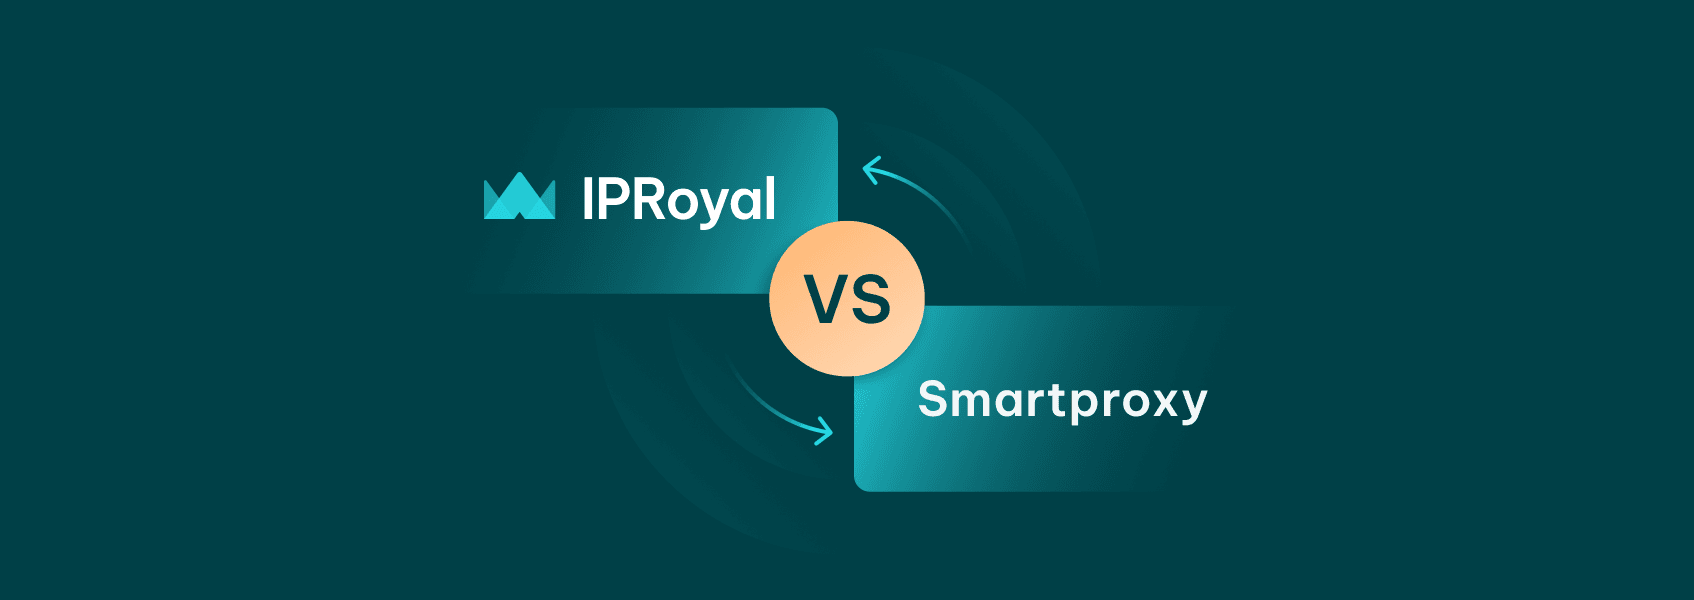 IPRoyal vs. Smartproxy – An In-depth Feature Comparison